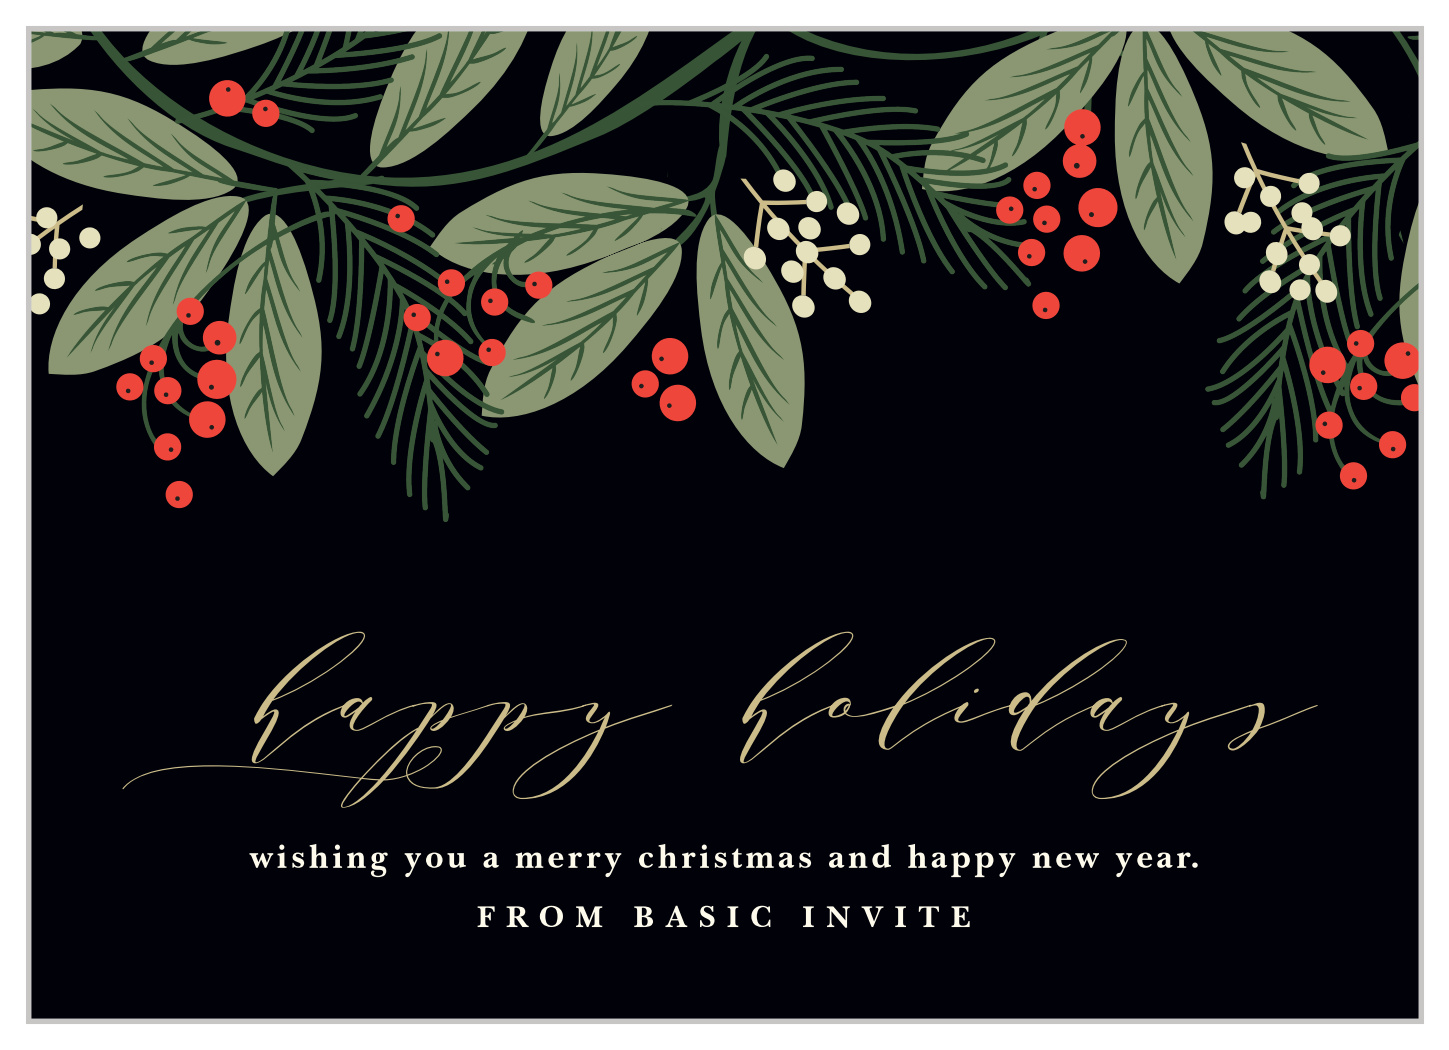 Foliage Frame Corporate Holiday Cards